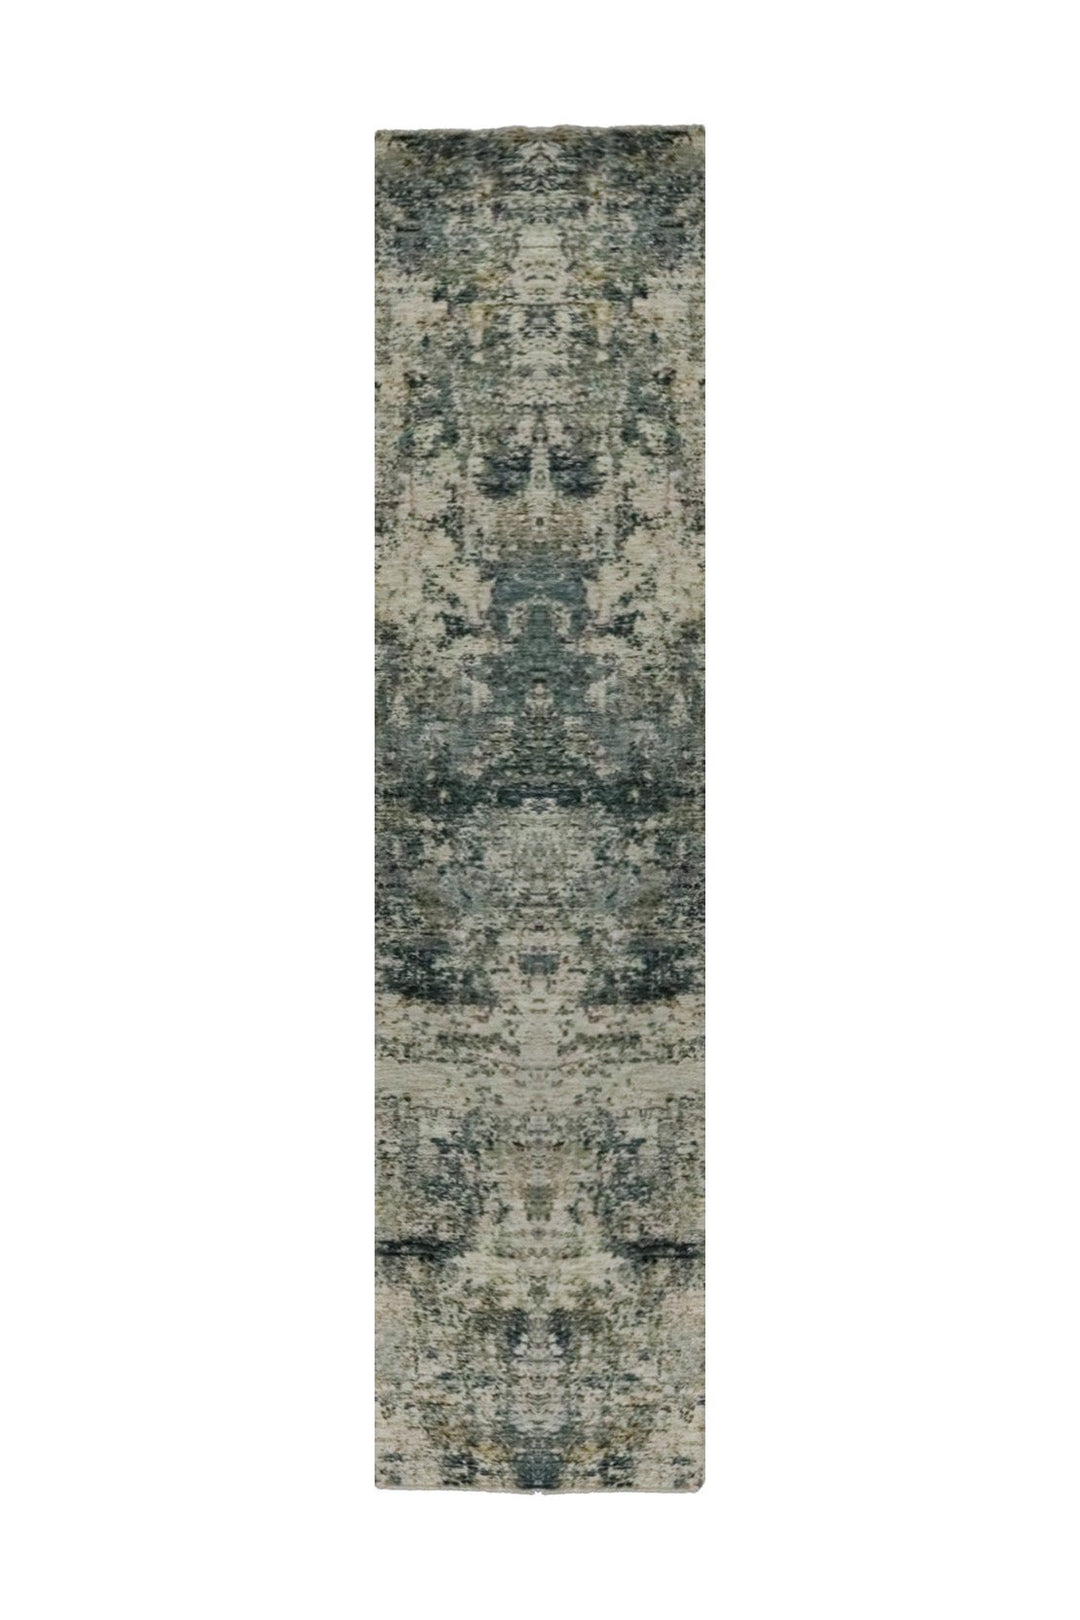 Turkish Modern Festival Plus Rug - 1.8 x 9.3 FT - Blue - Superior Comfort, Modern Style Accent Rugs - V Surfaces